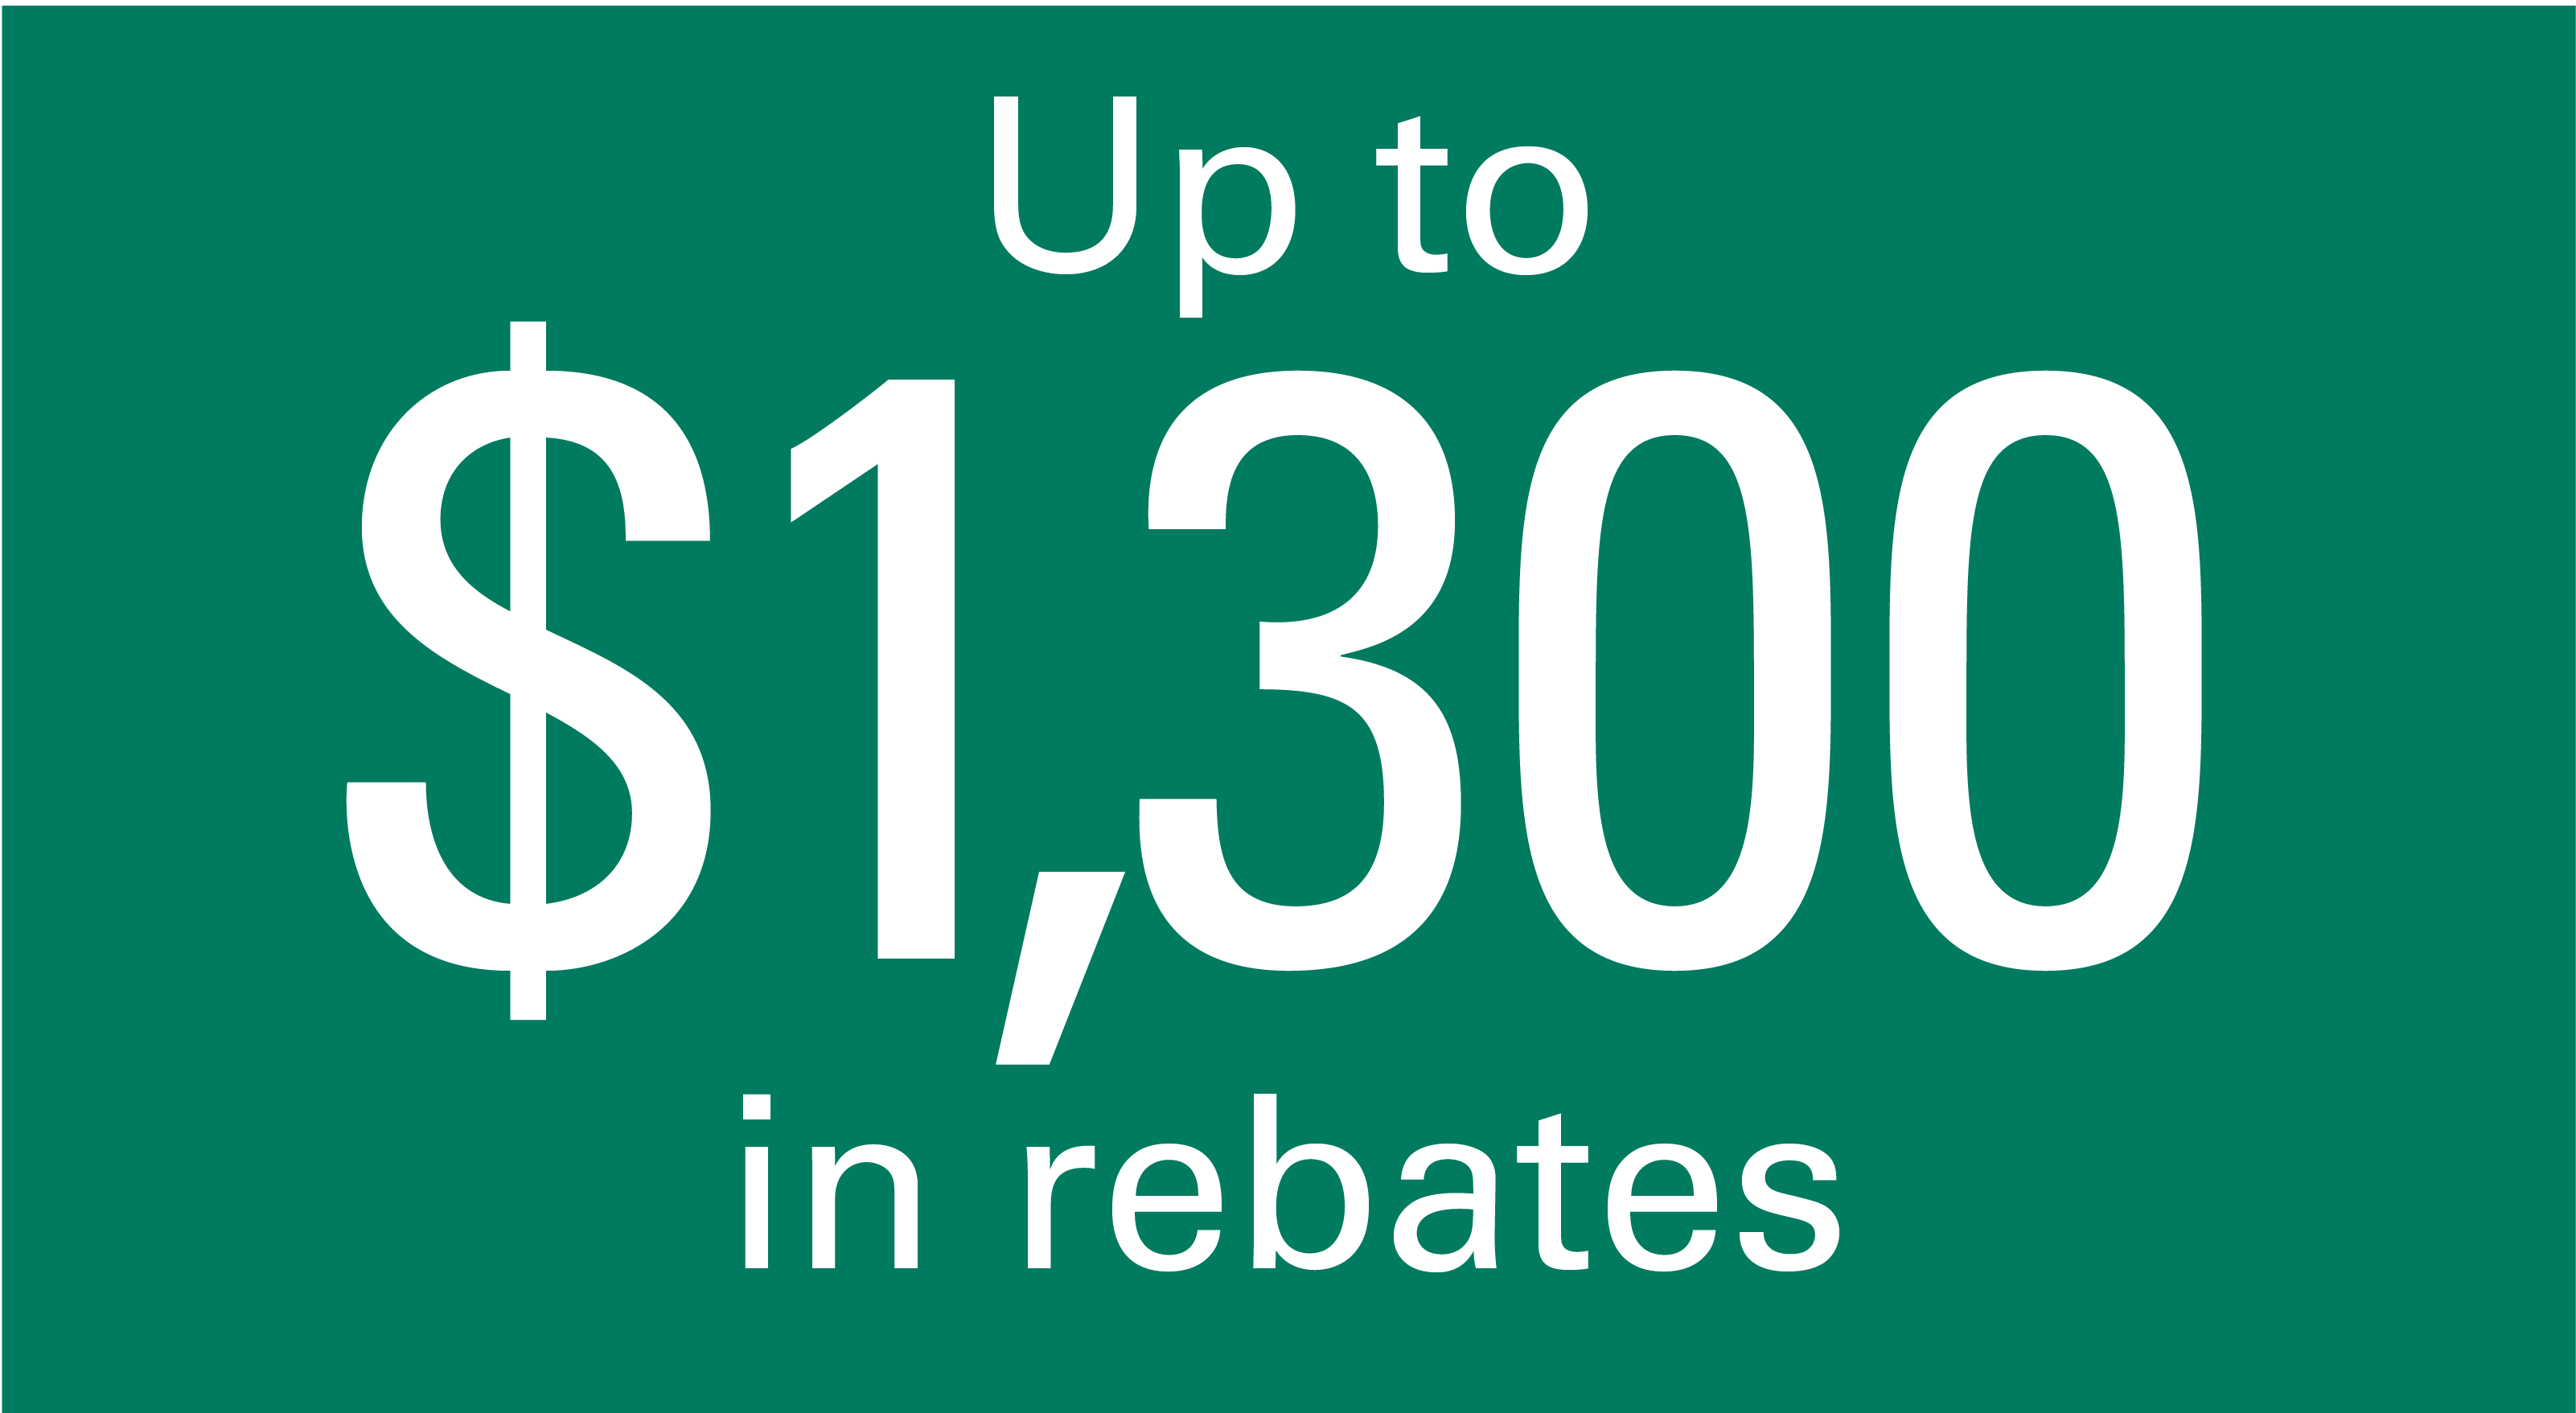 water-heater-rebate-mn-the-homeowners-guide-to-tax-credits-and